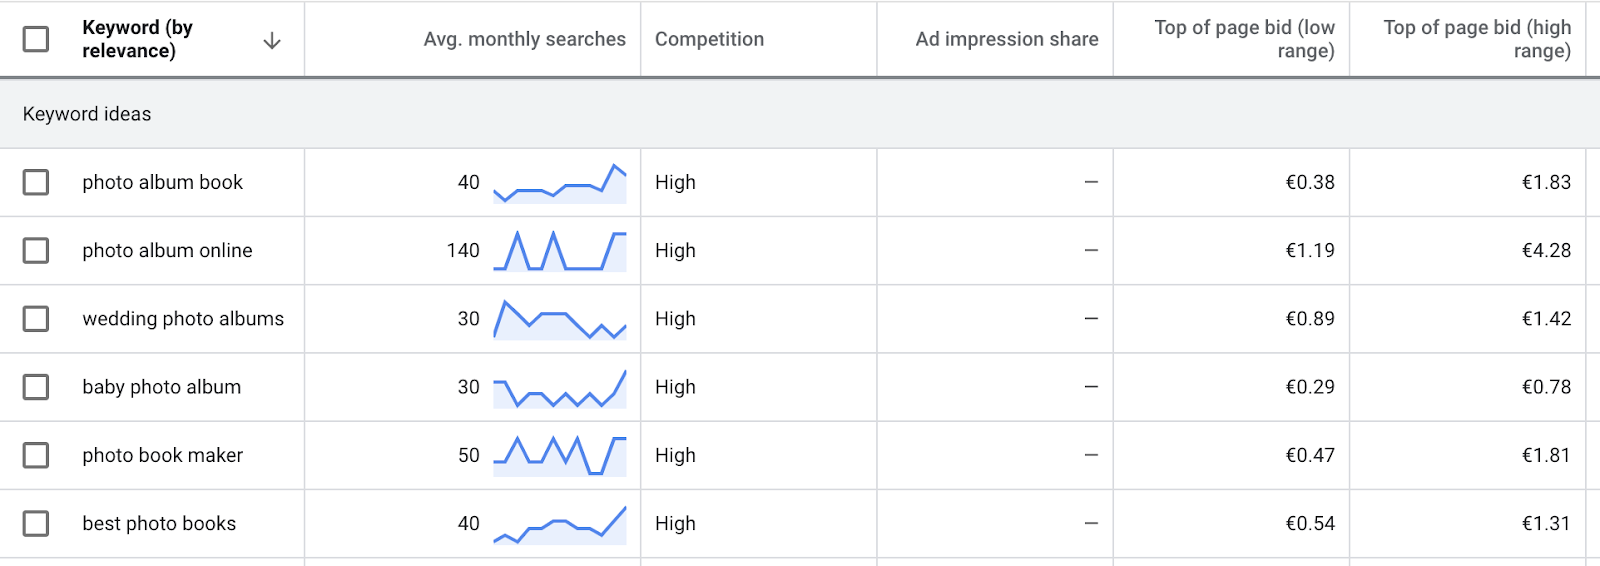 Keyword research by relevance (Average monthly searches, competition, etc.)